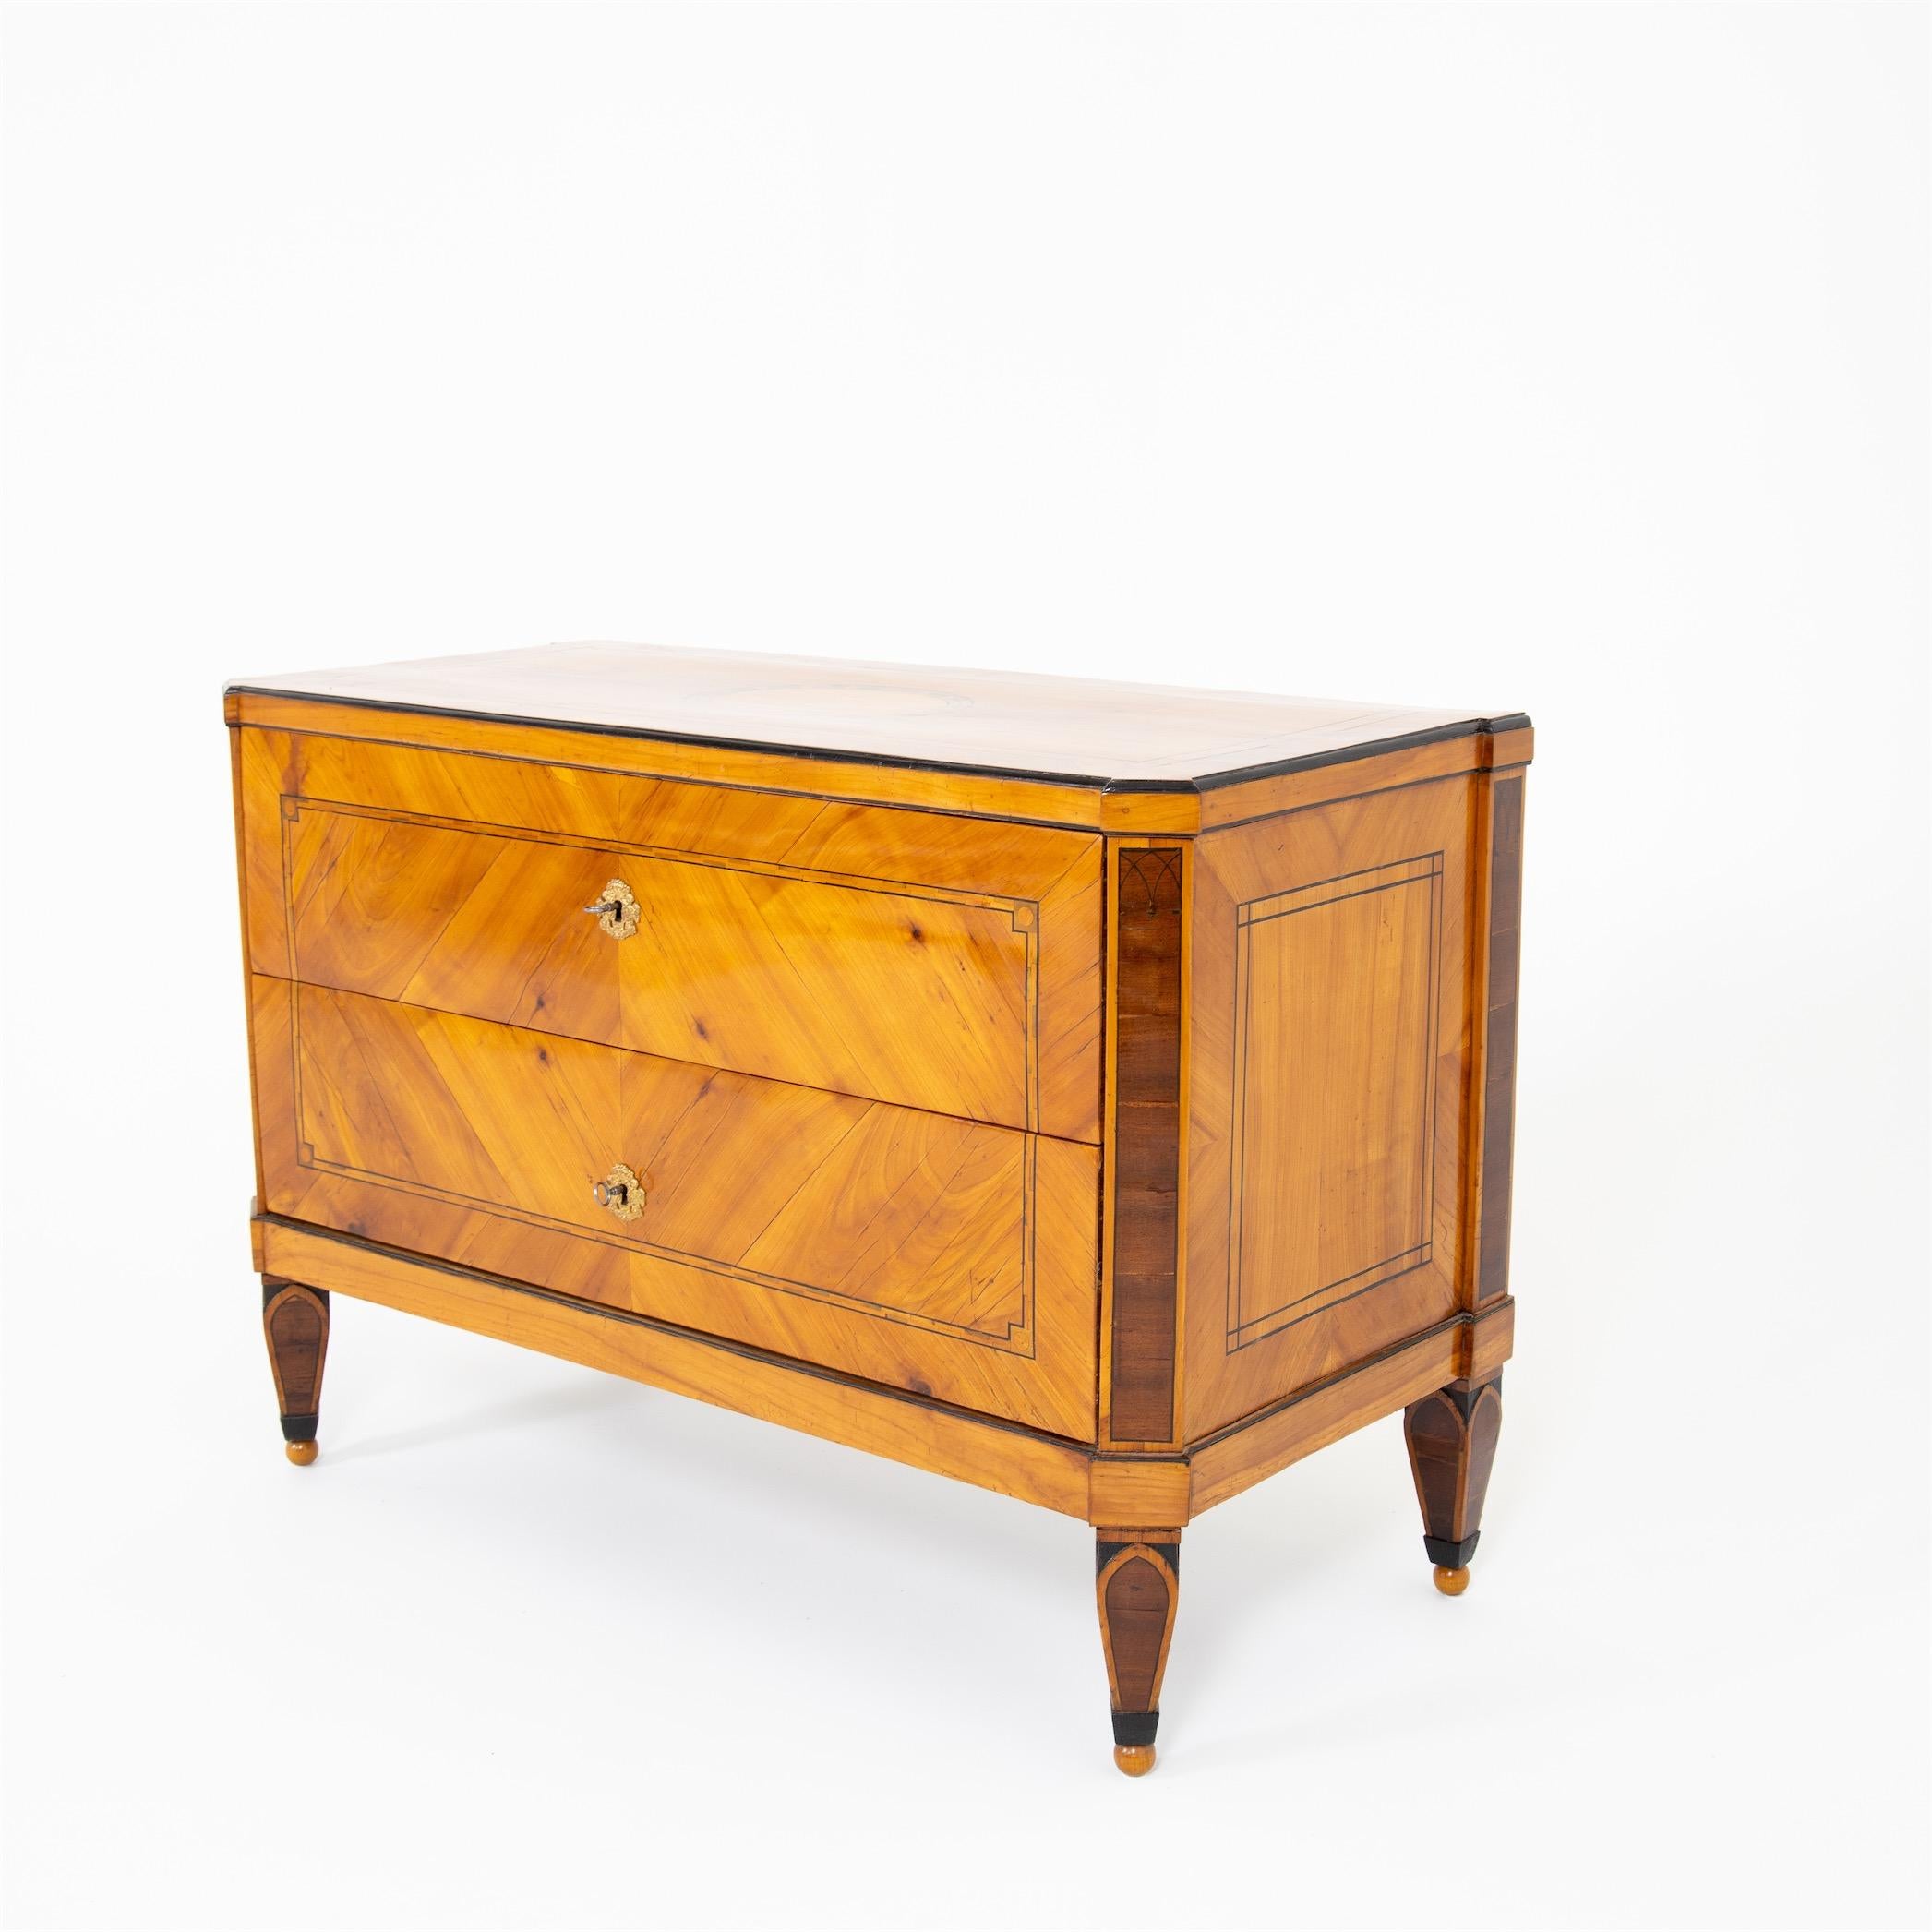 Early 19th Century Neoclassical Chest of Drawers, Southern Germany, circa 1800